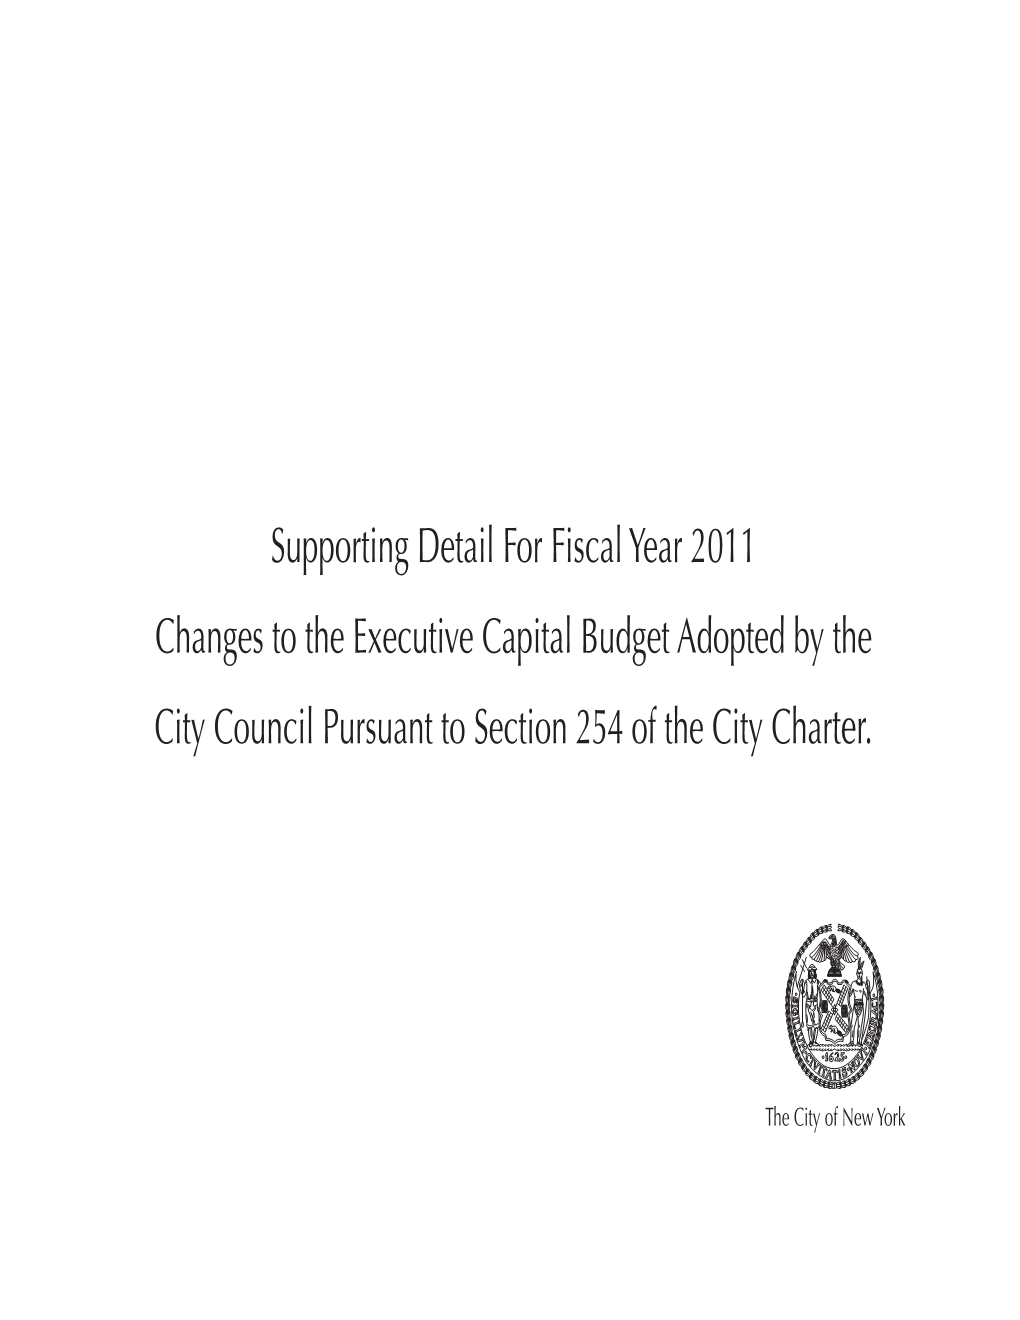 Supporting Detail for Fiscal Year 2011 Changes to the Executive Capital Budget Adopted by the City Council Pursuant to Section 254 of the City Charter